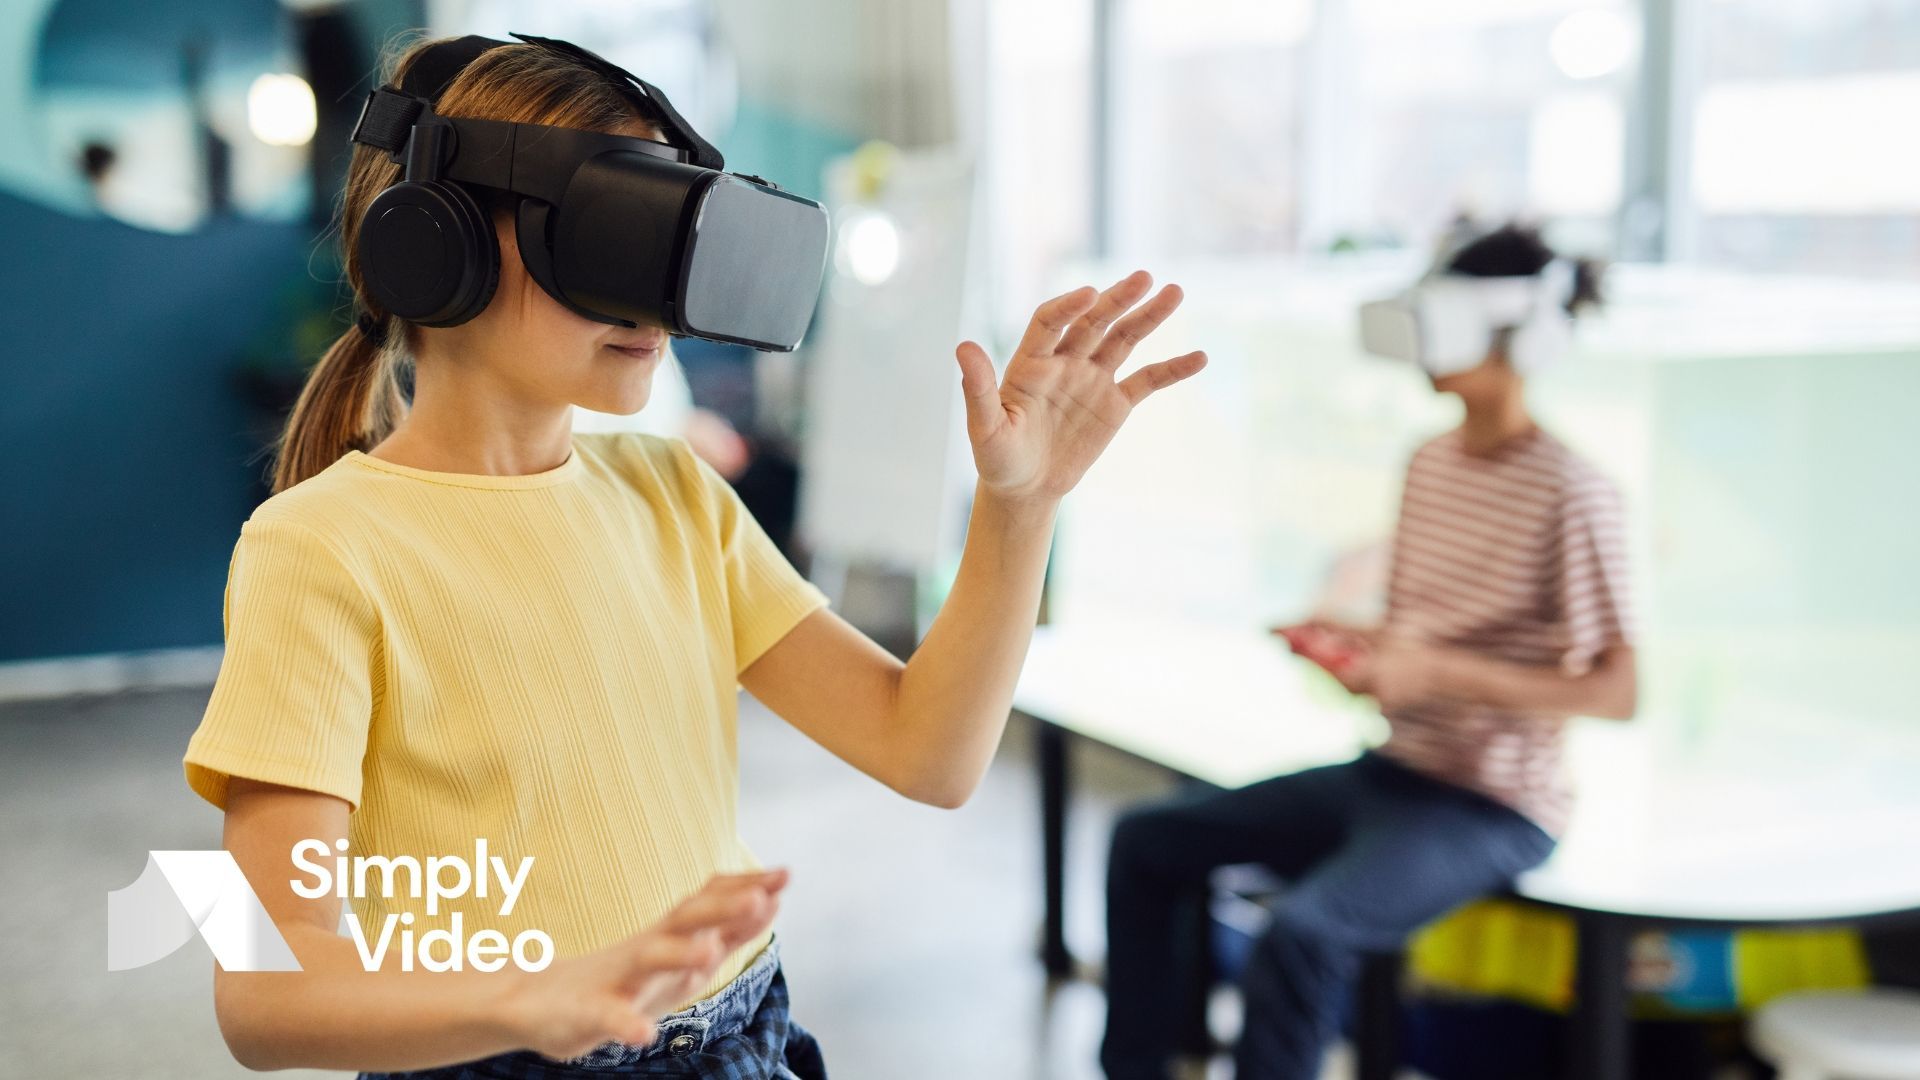 Immersive learning is the new frontier in the world of education. Find out how XR technologies can help create engaging, memorable lessons.